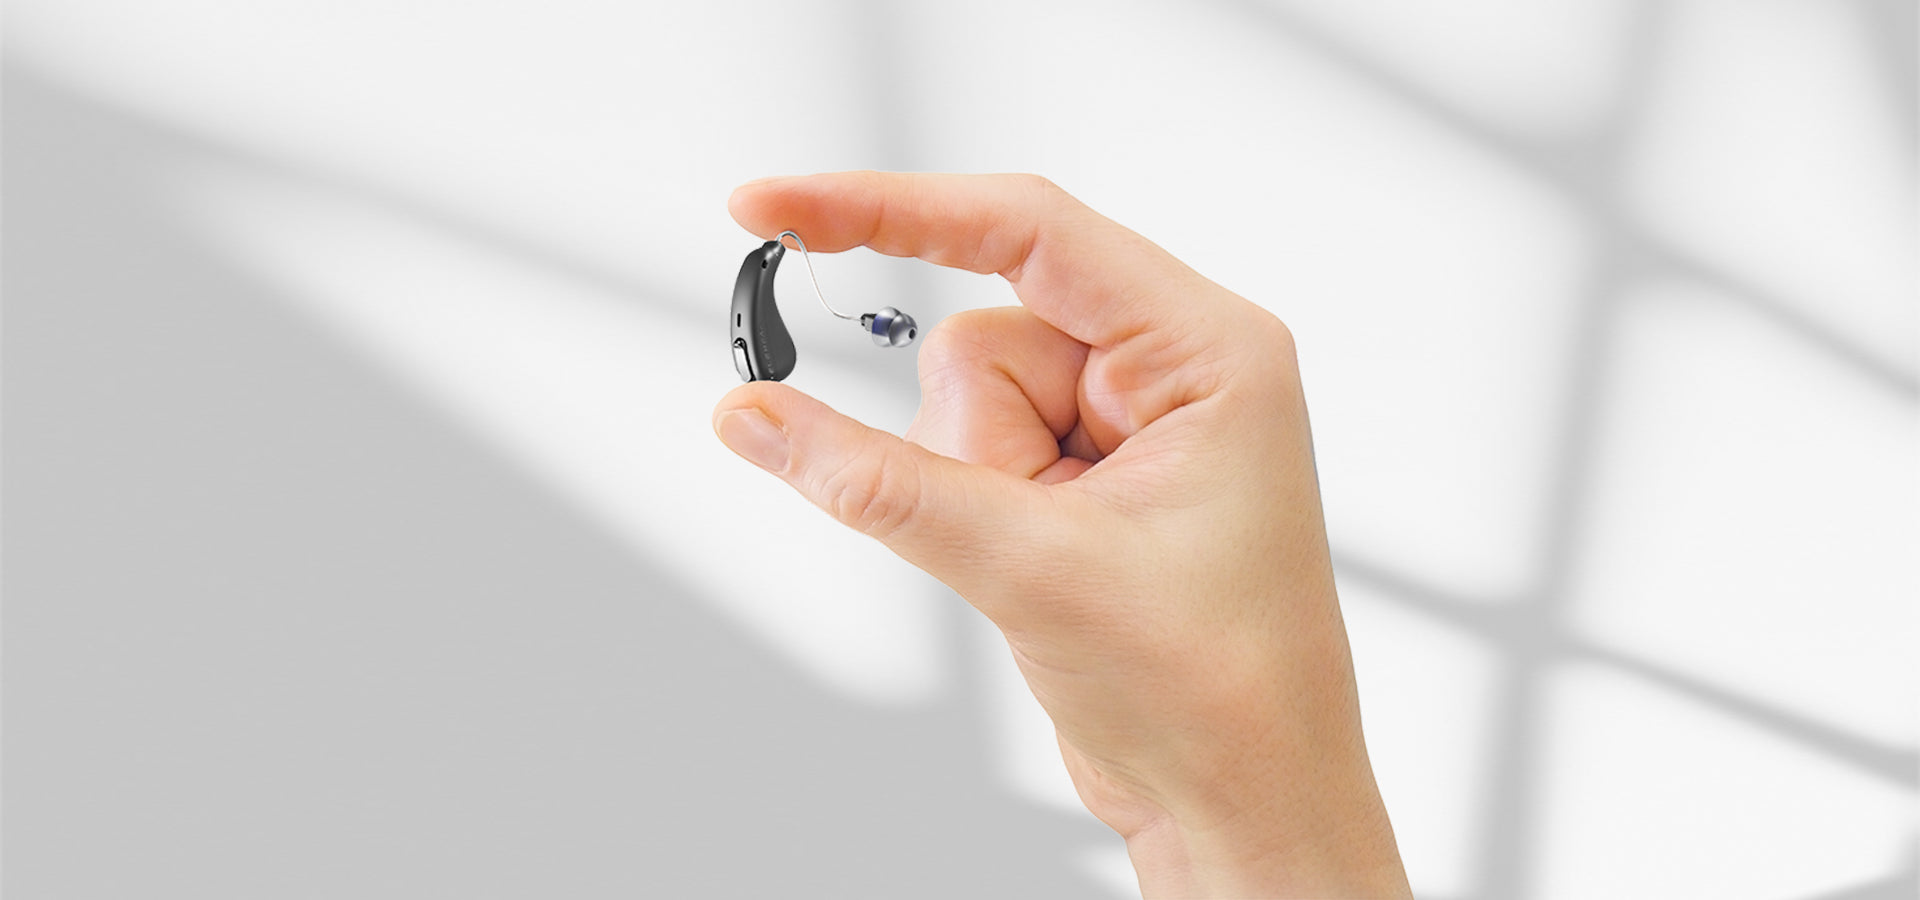 Most Frequently Asked Questions(FAQs) You Must Know About OTC Hearing Aids